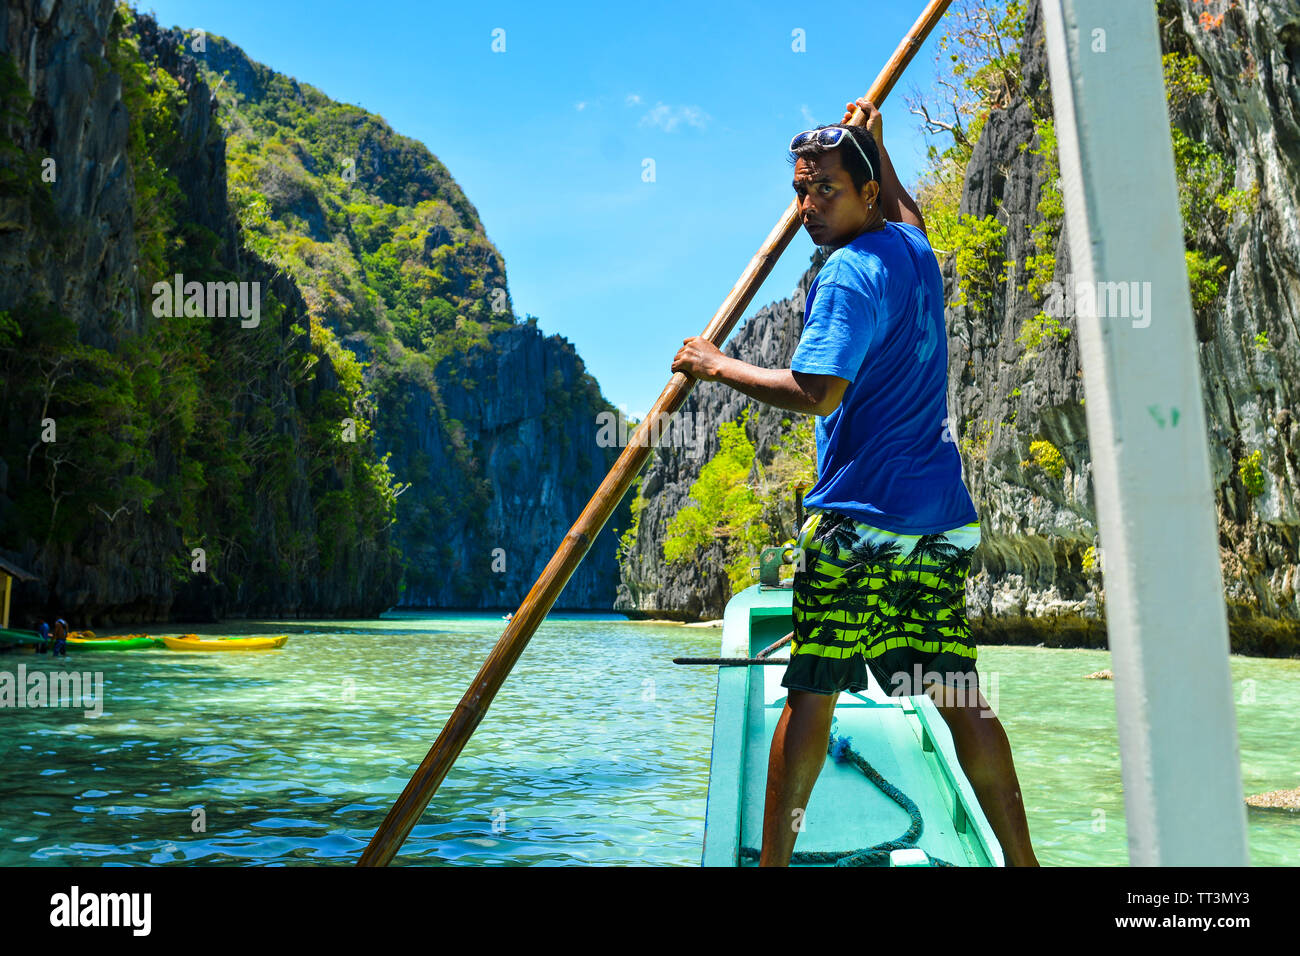 El Nido, Philippines, 25th, February, 2016. The captain was rowing on the boat. El Nido is a 1st class municipality in the province of Palawan. Stock Photo